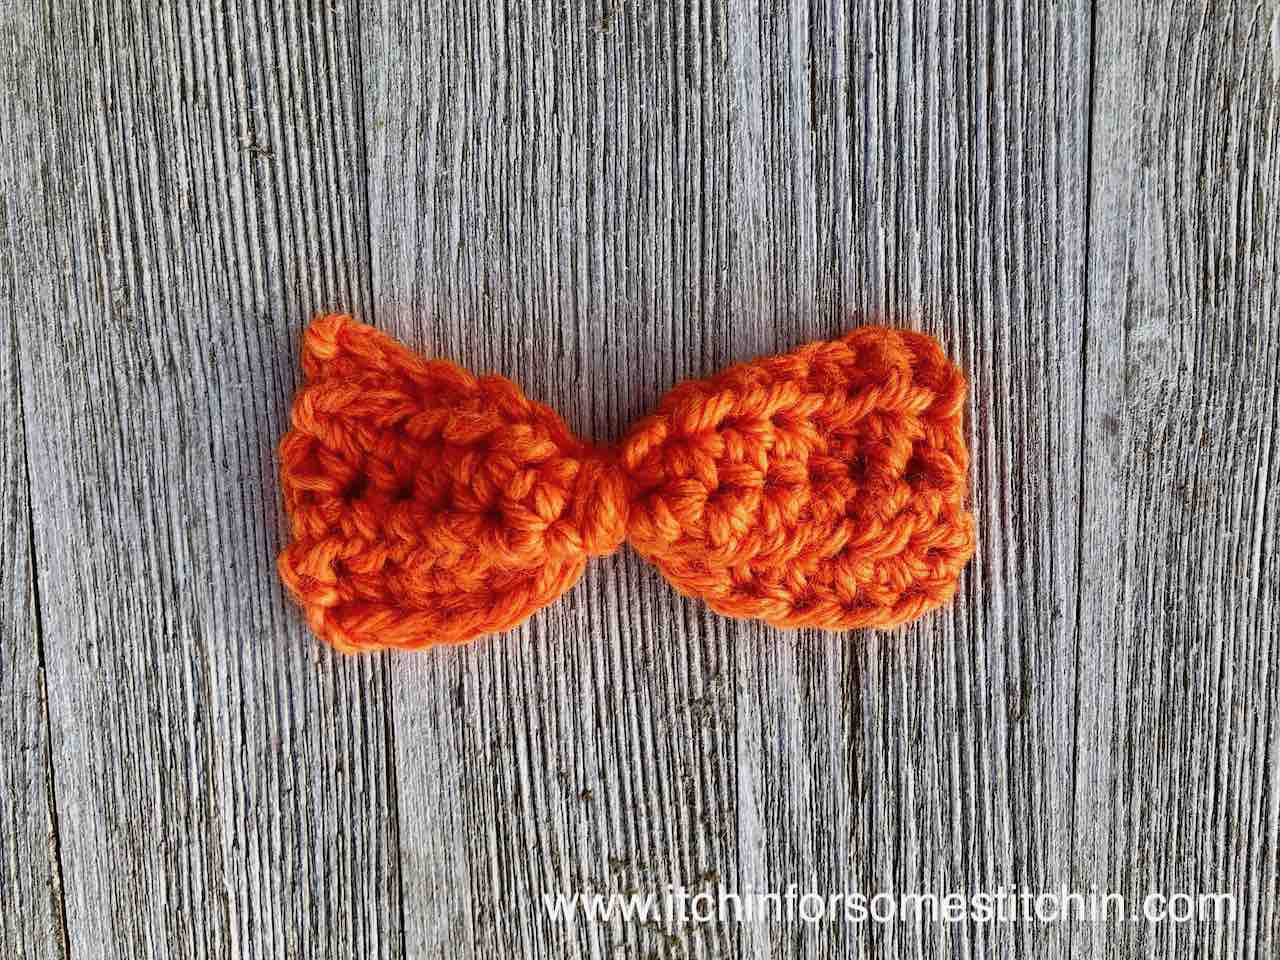 How to Crochet an Easy Bow by www.itchinforsomestitchin.com